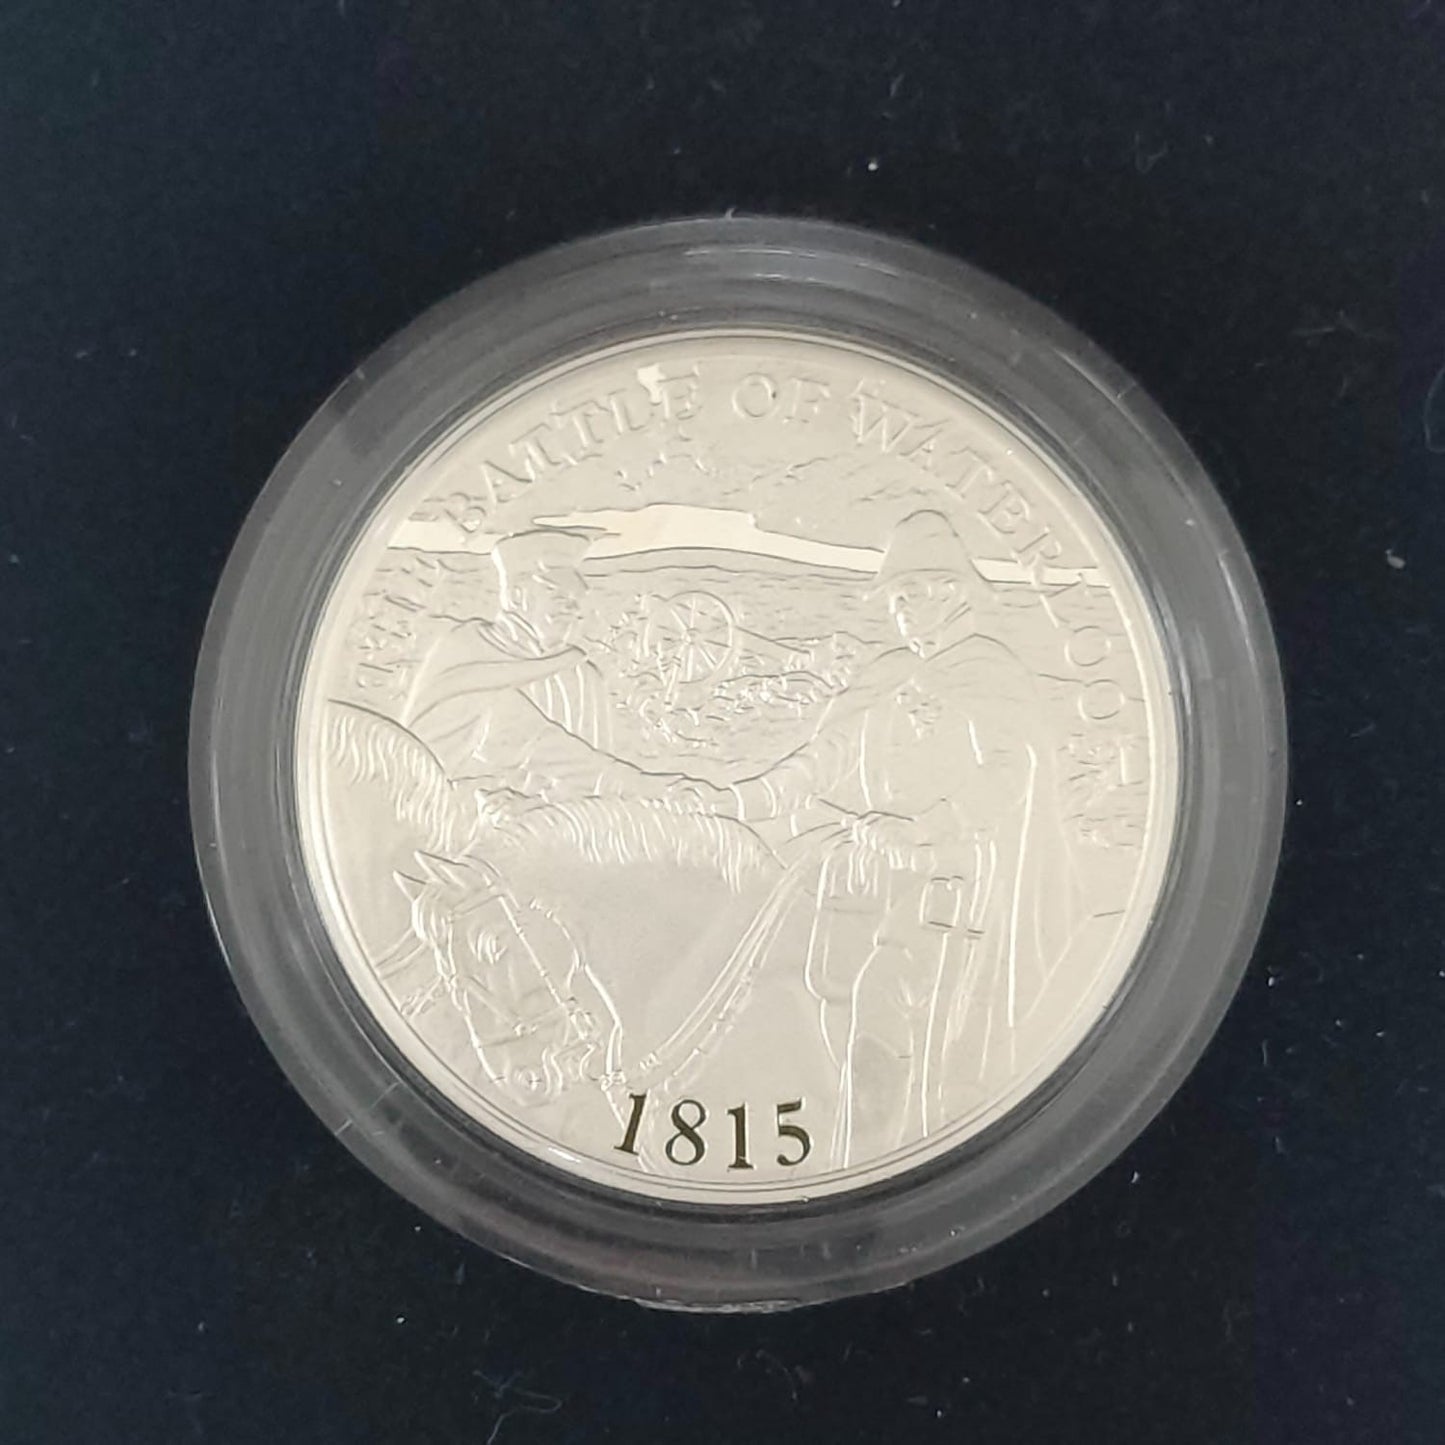 200th Anniversary Of The Battle Of Waterloo UK £5 Silver Proof Piedfort Coin